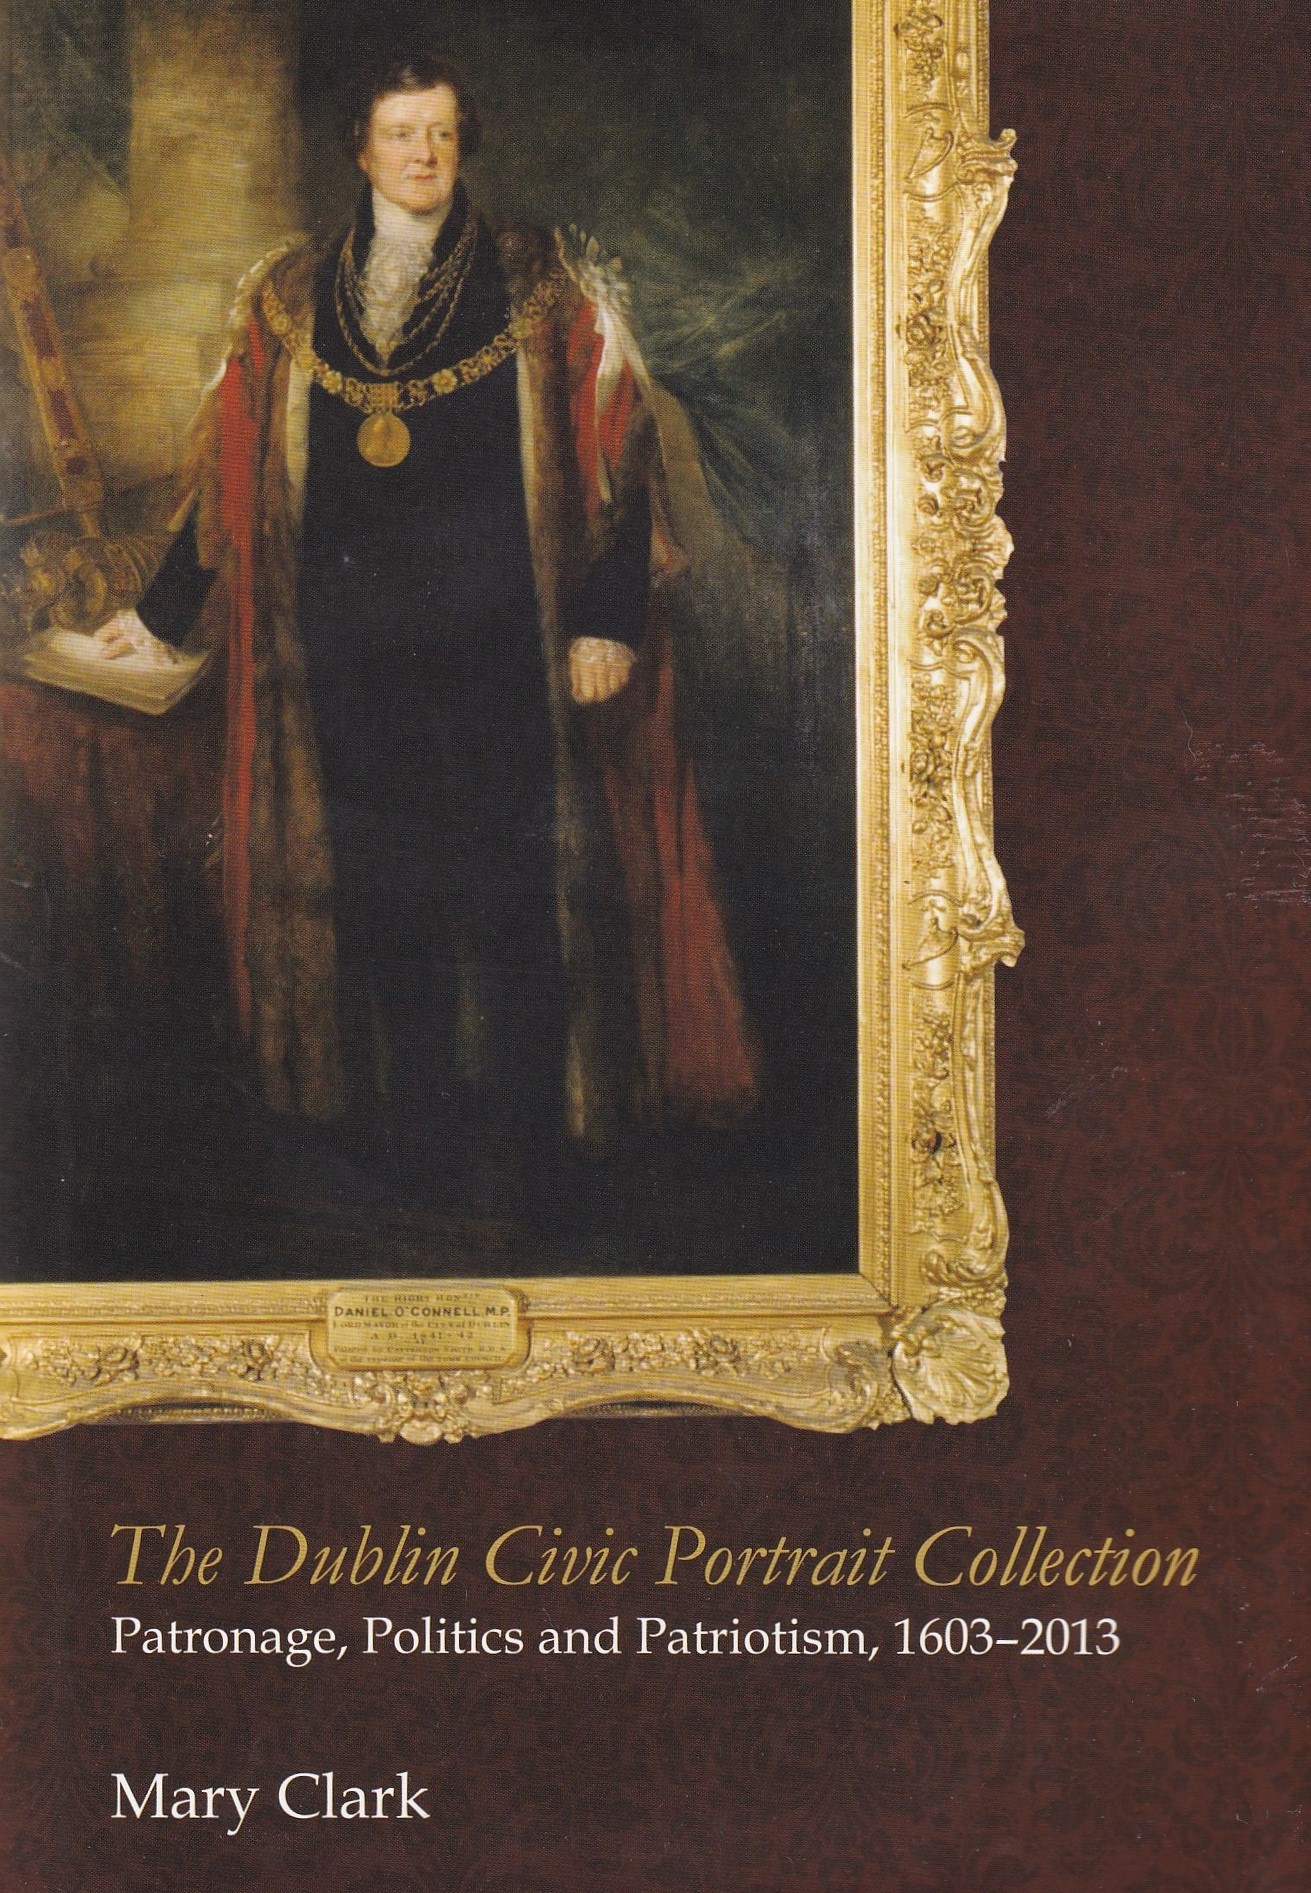 The Dublin Civic Portrait Collection Patronage, politics and patriotism, 1603–2013 by Mary Clark